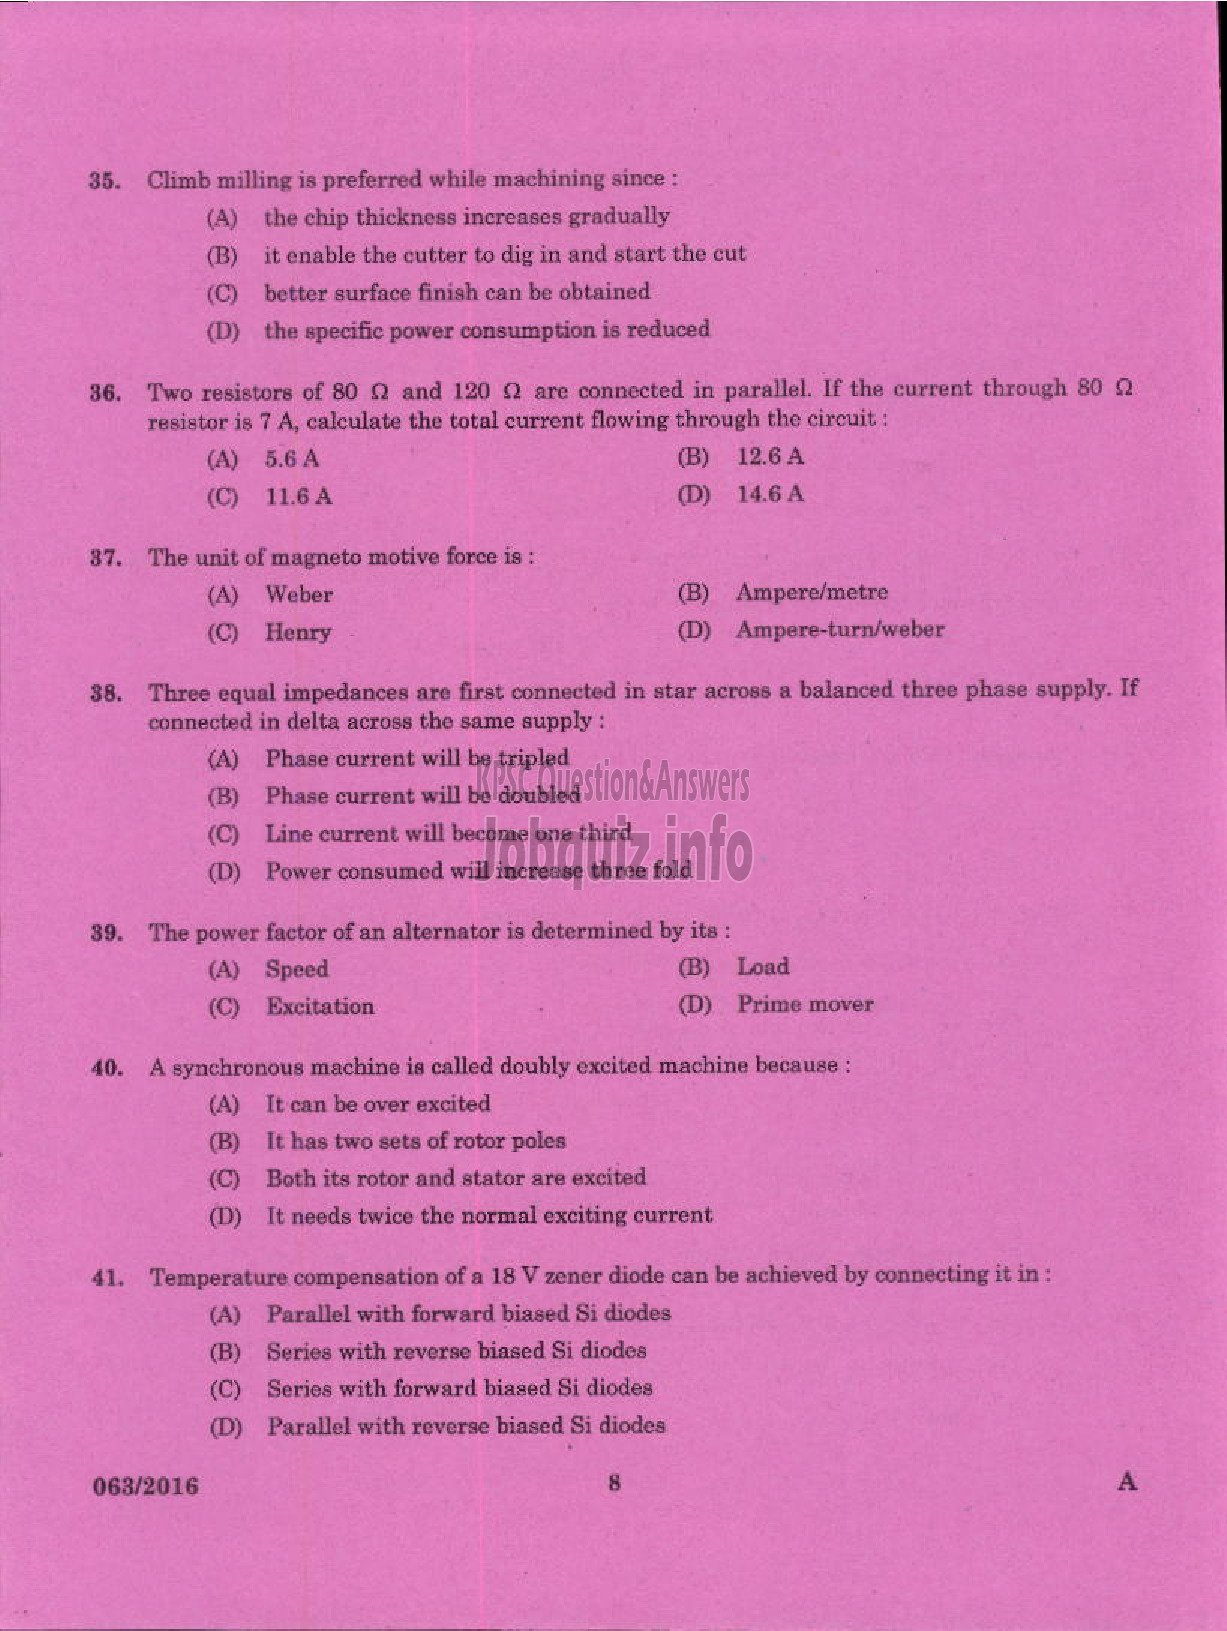 Kerala PSC Question Paper - ASSISTANT PROFESSOR IN ELECTRICAL AND ELECTRONICS ENGINEERING TECHNICAL EDUCATION ENGINEERING COLLEGES-6